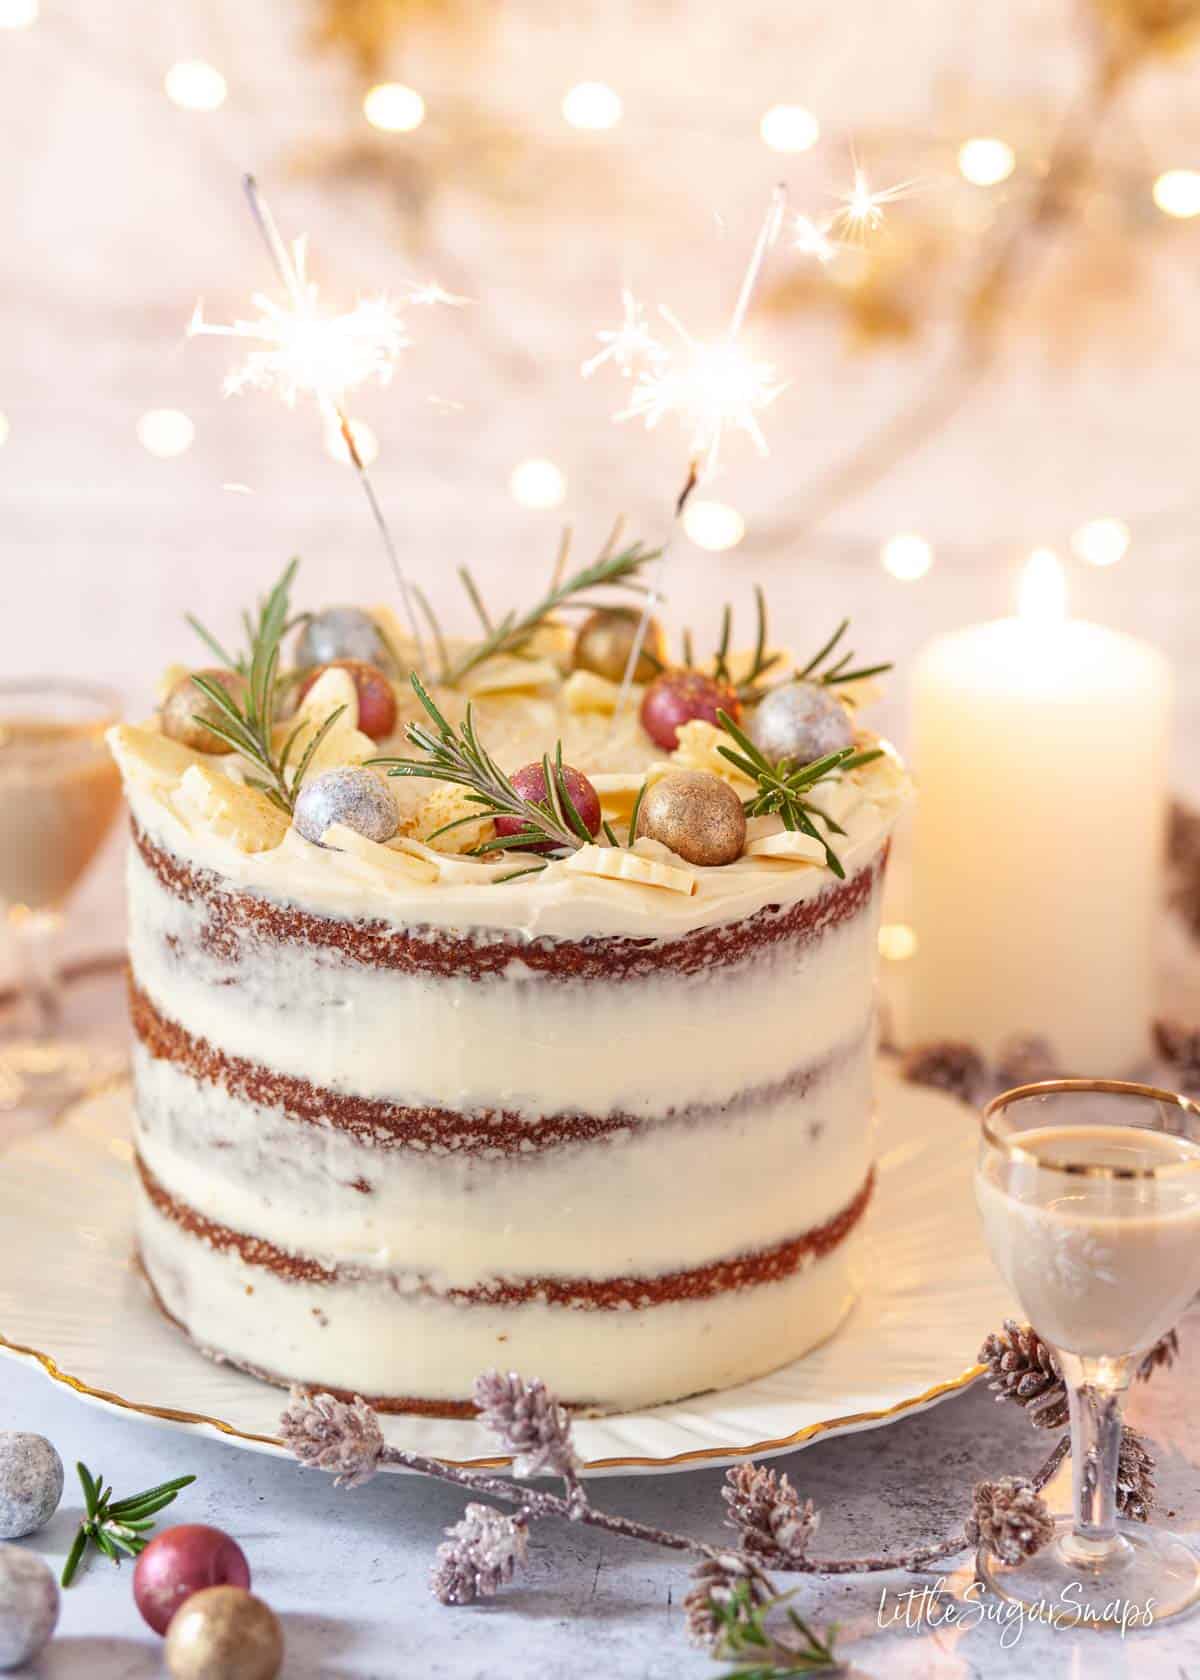 A naked White chocolate Baileys cake decorated with mascarpone frosting, chocolates and rosemary